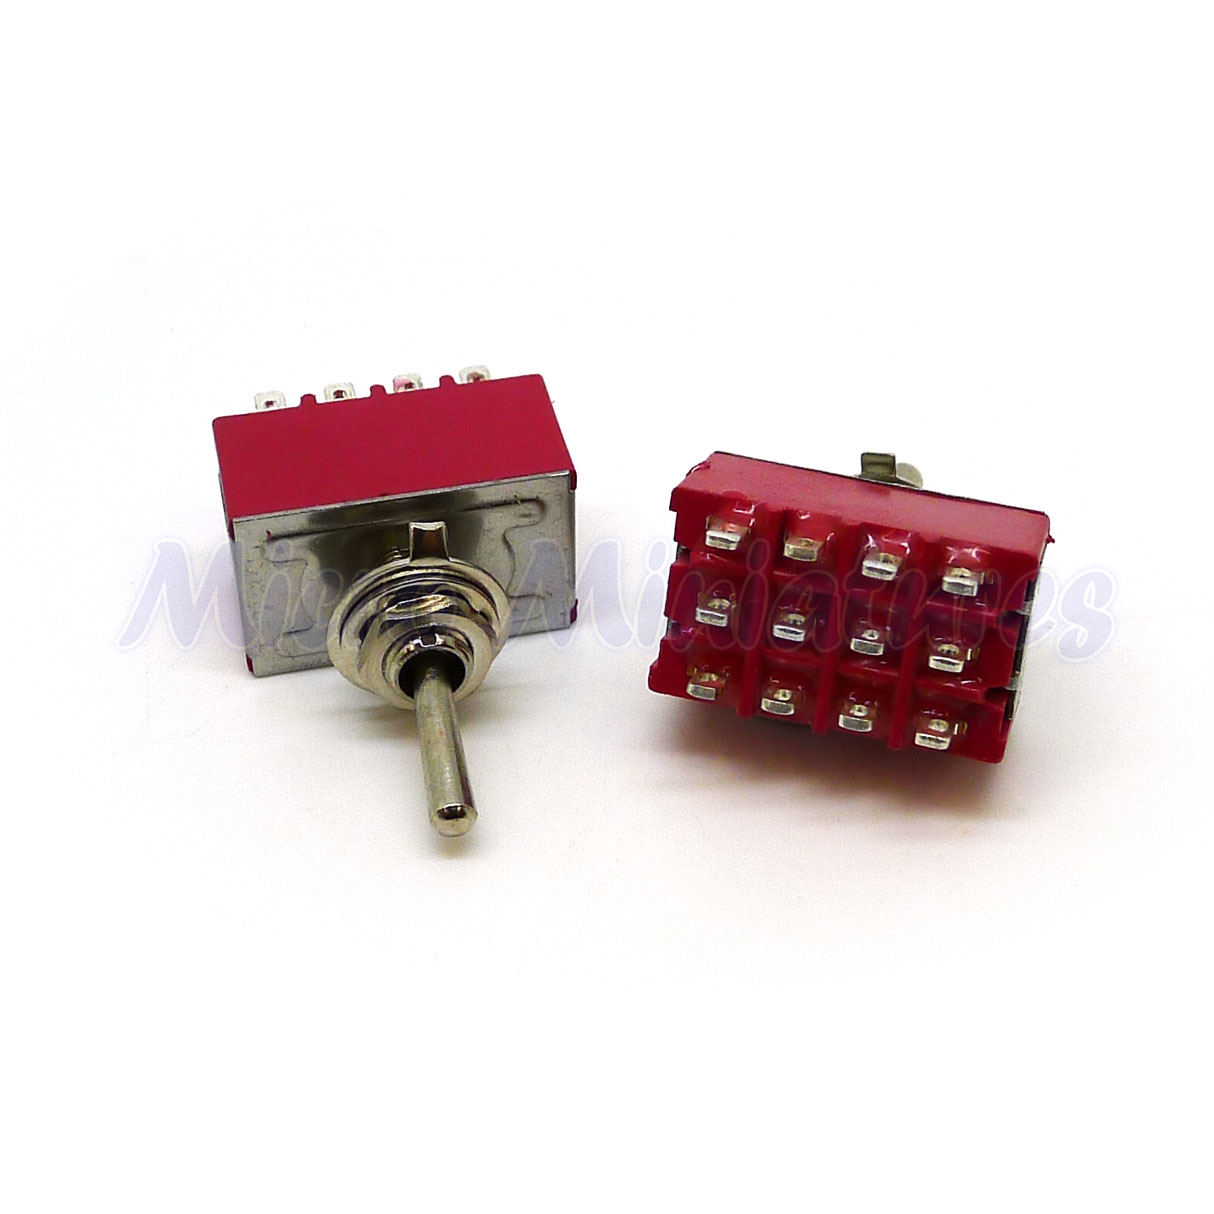 4PDT Miniature Toggle Switch on-off-on Centre Off Model Railway Hobby 5669 ED02 